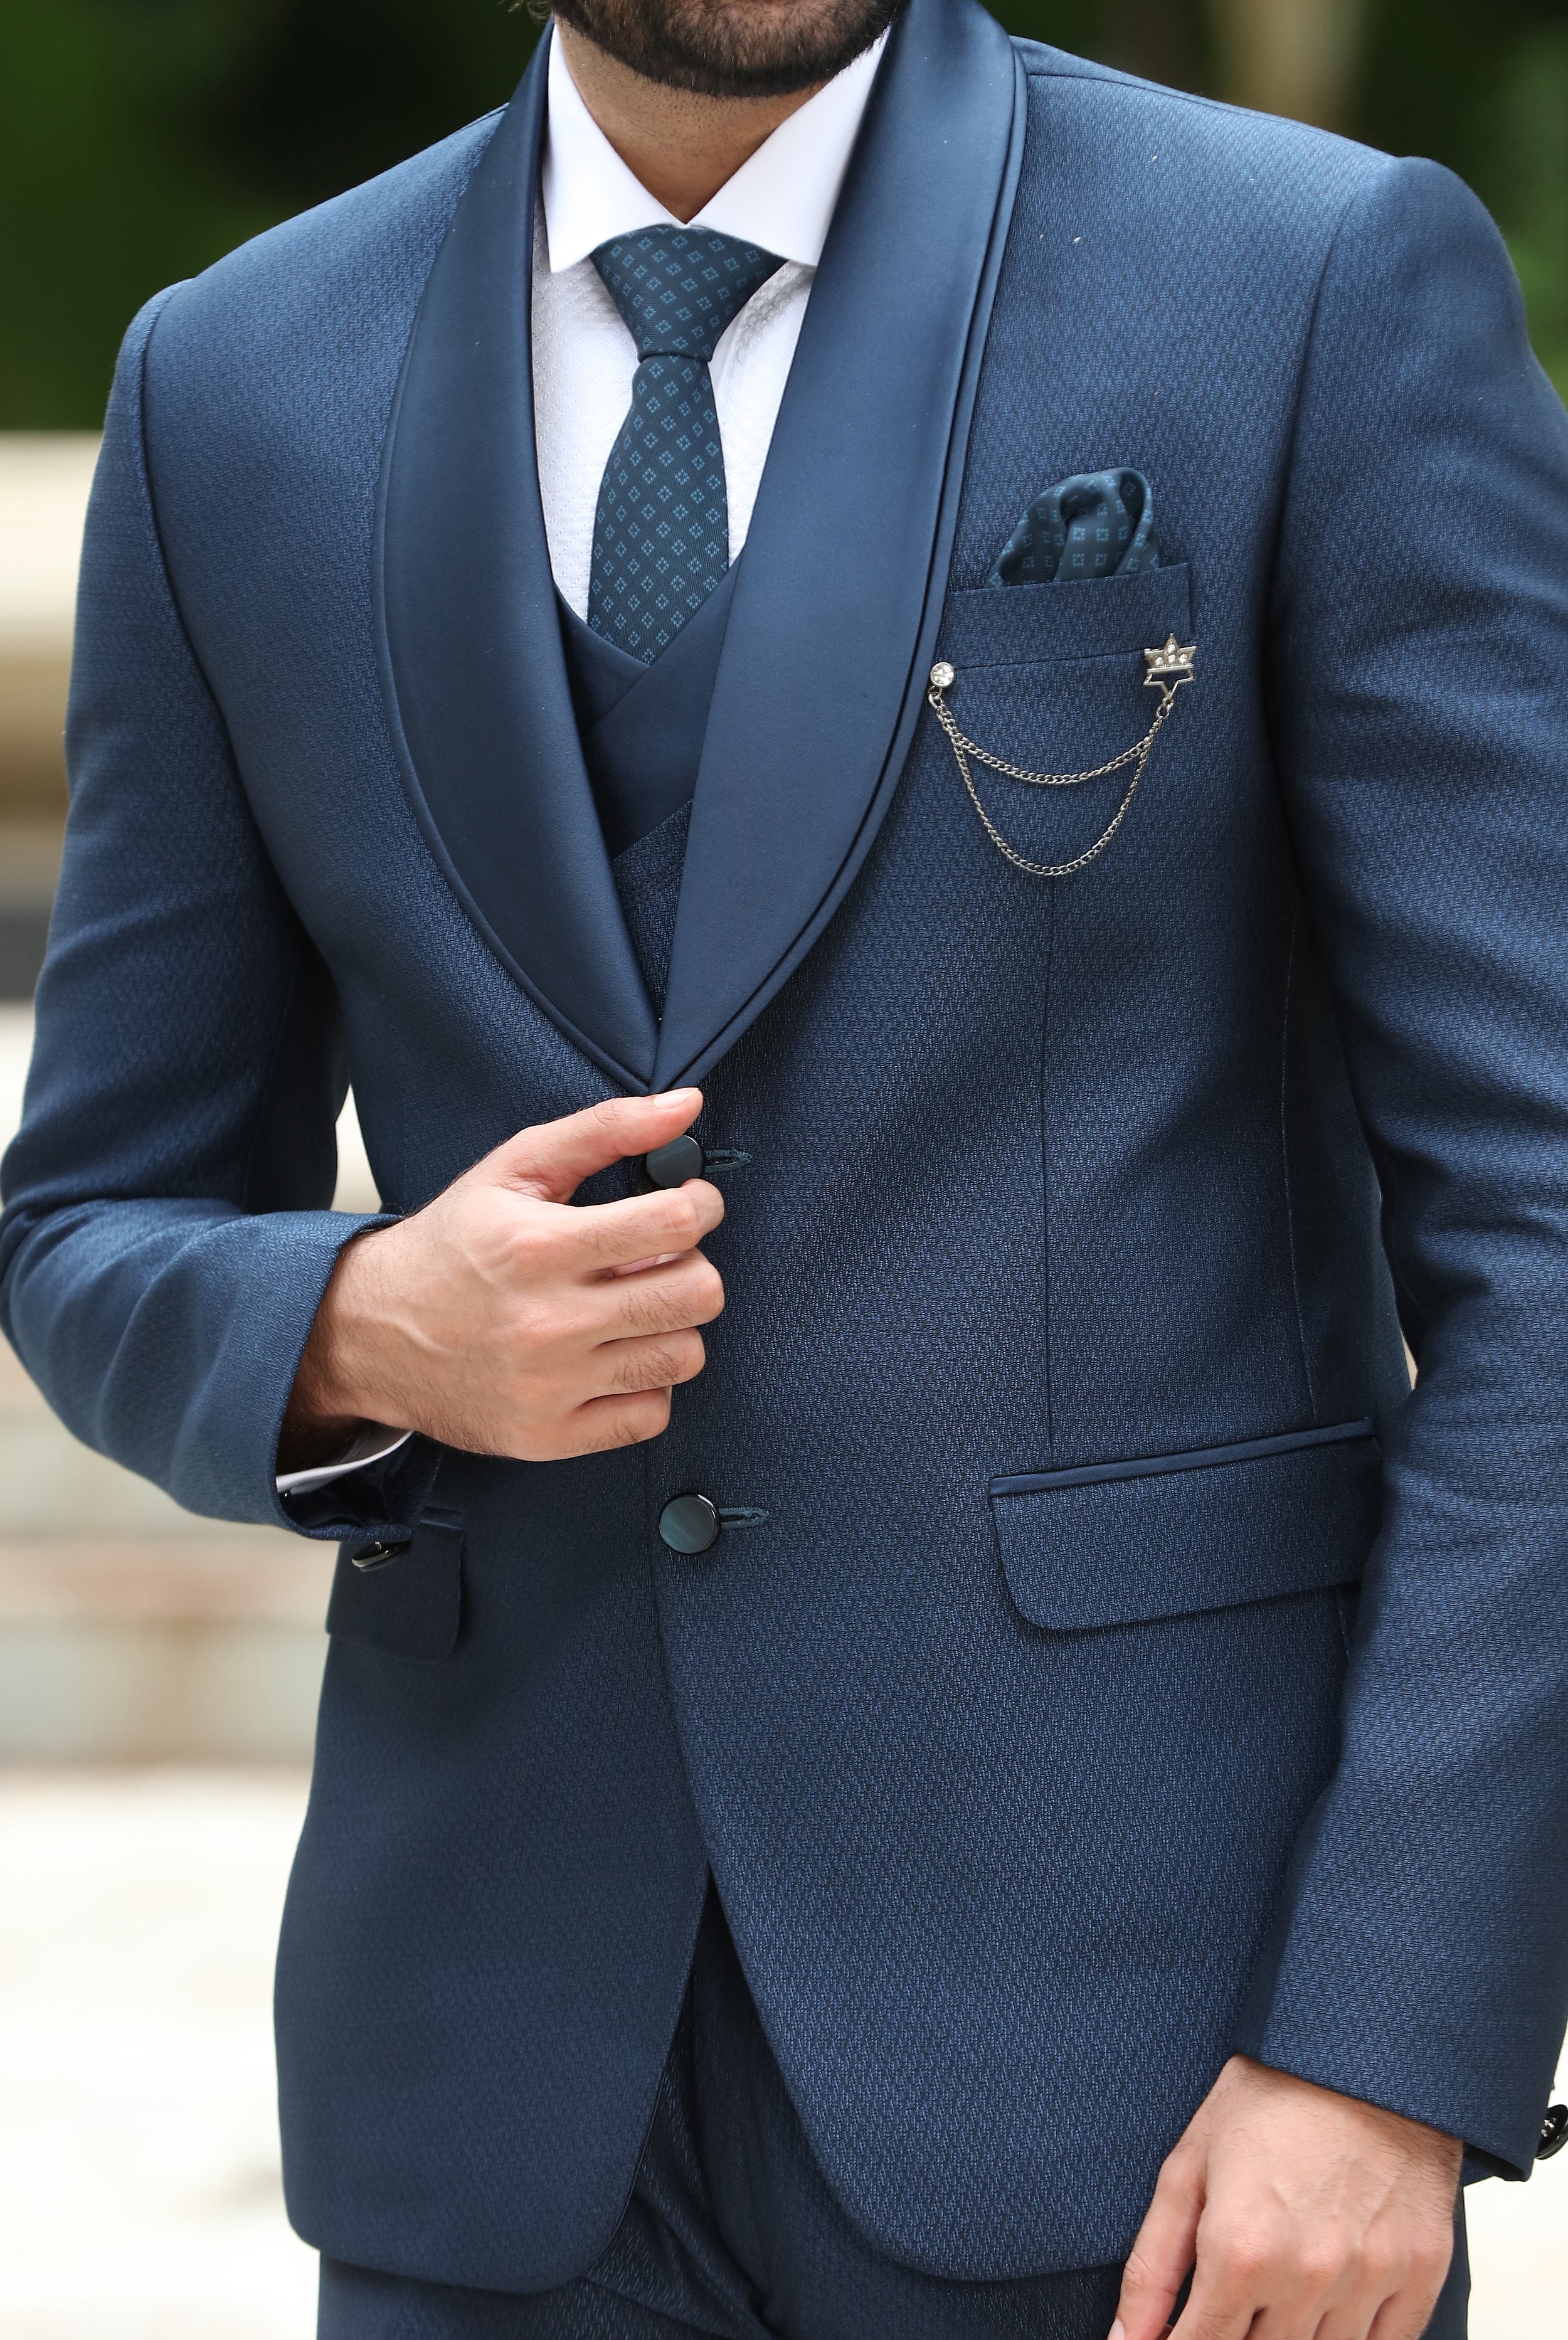 Navy Blue Beaded Wedding Suit With Appliques For Men Slim Fit Formal Blue  Groom Tuxedo With Custom Made Pants And Jacket From Greatvip, $85.81 |  DHgate.Com